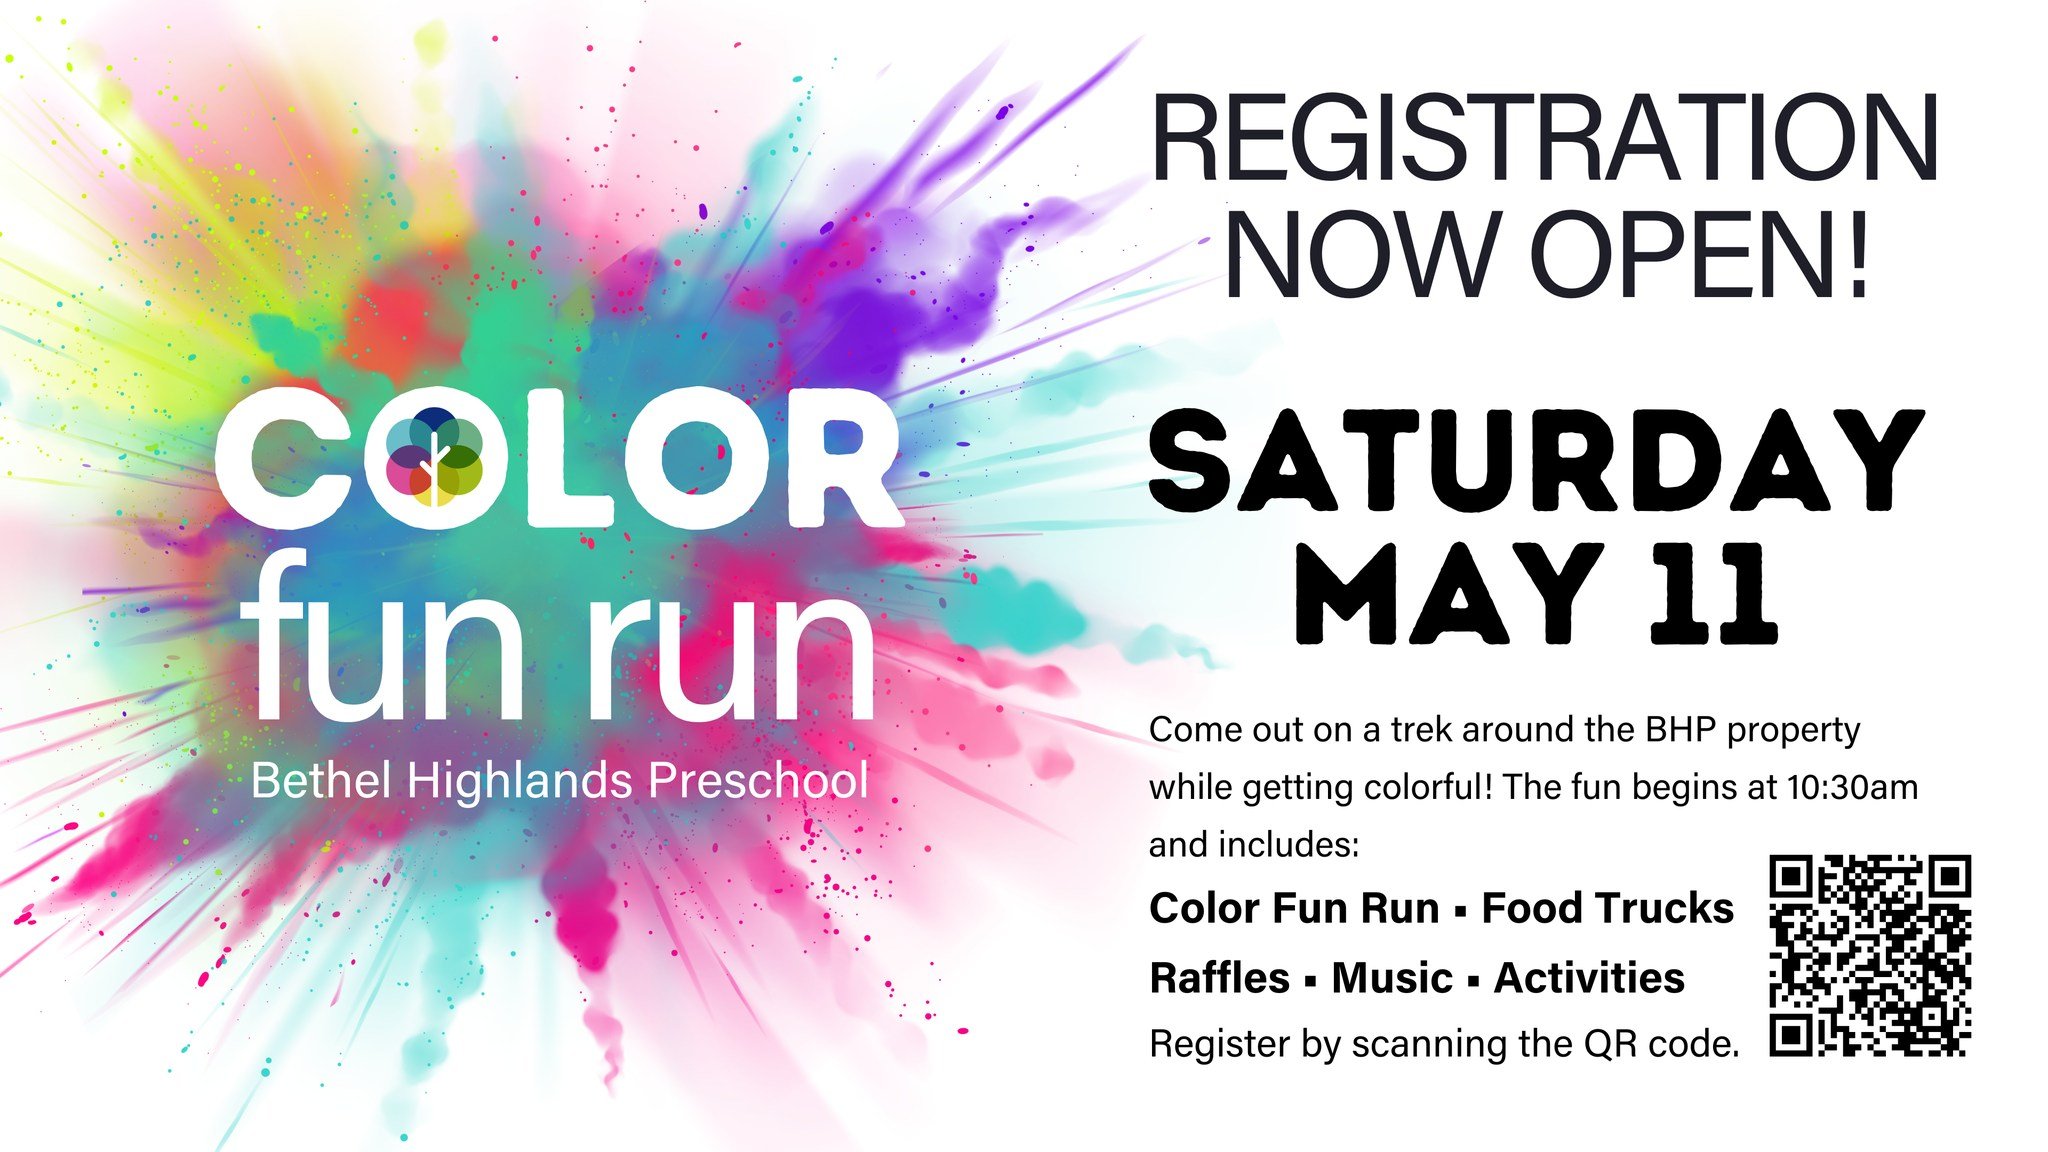 We are getting very excited for our second color fun run. 
Come take a fun run full of colors through our woods and prairie land. 
Early Bird registration end this Friday, April 12th.